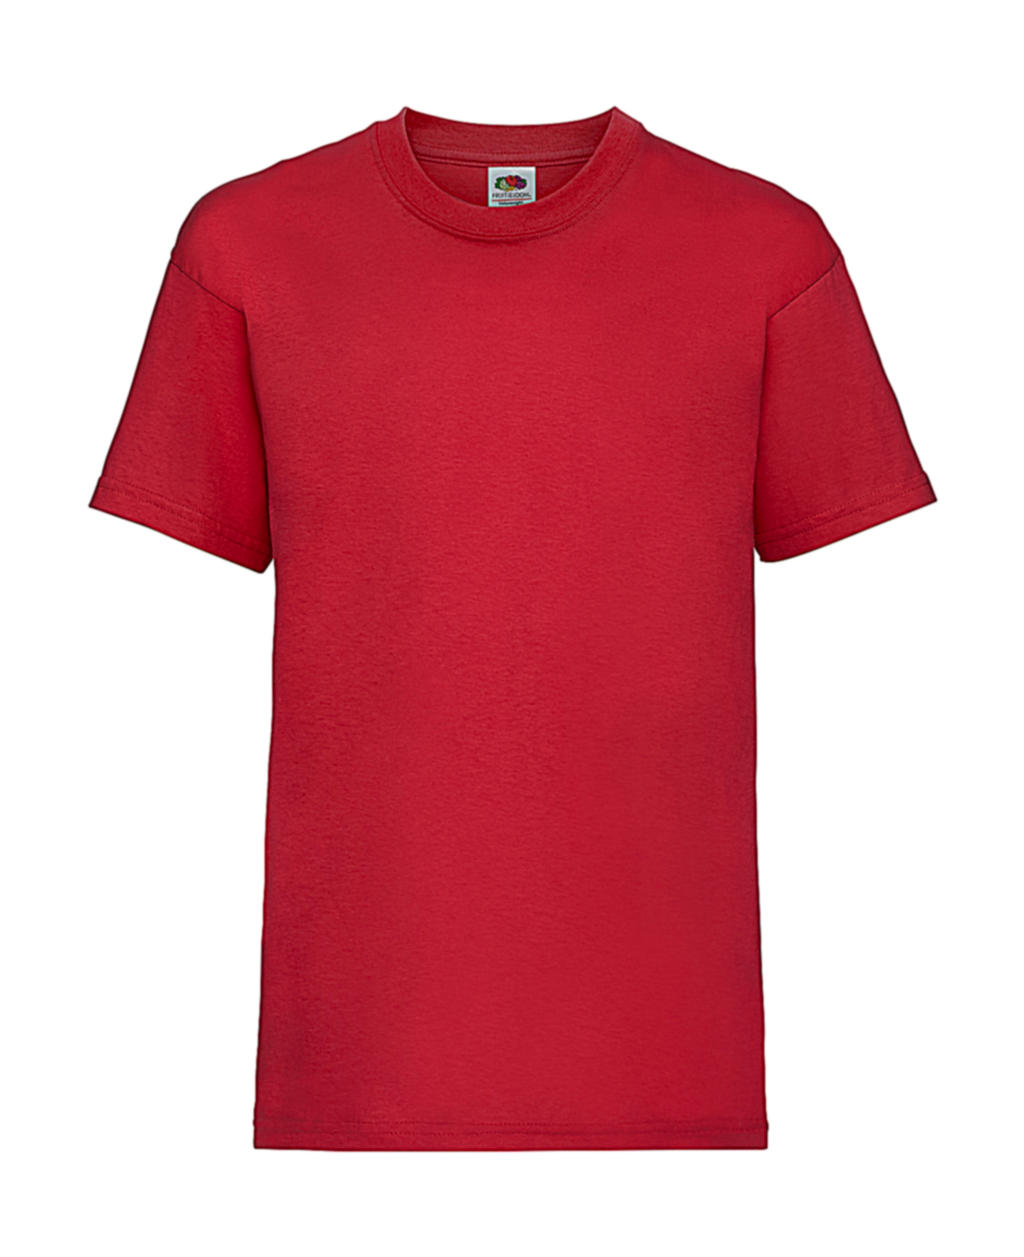  Kids Valueweight T in Farbe Red